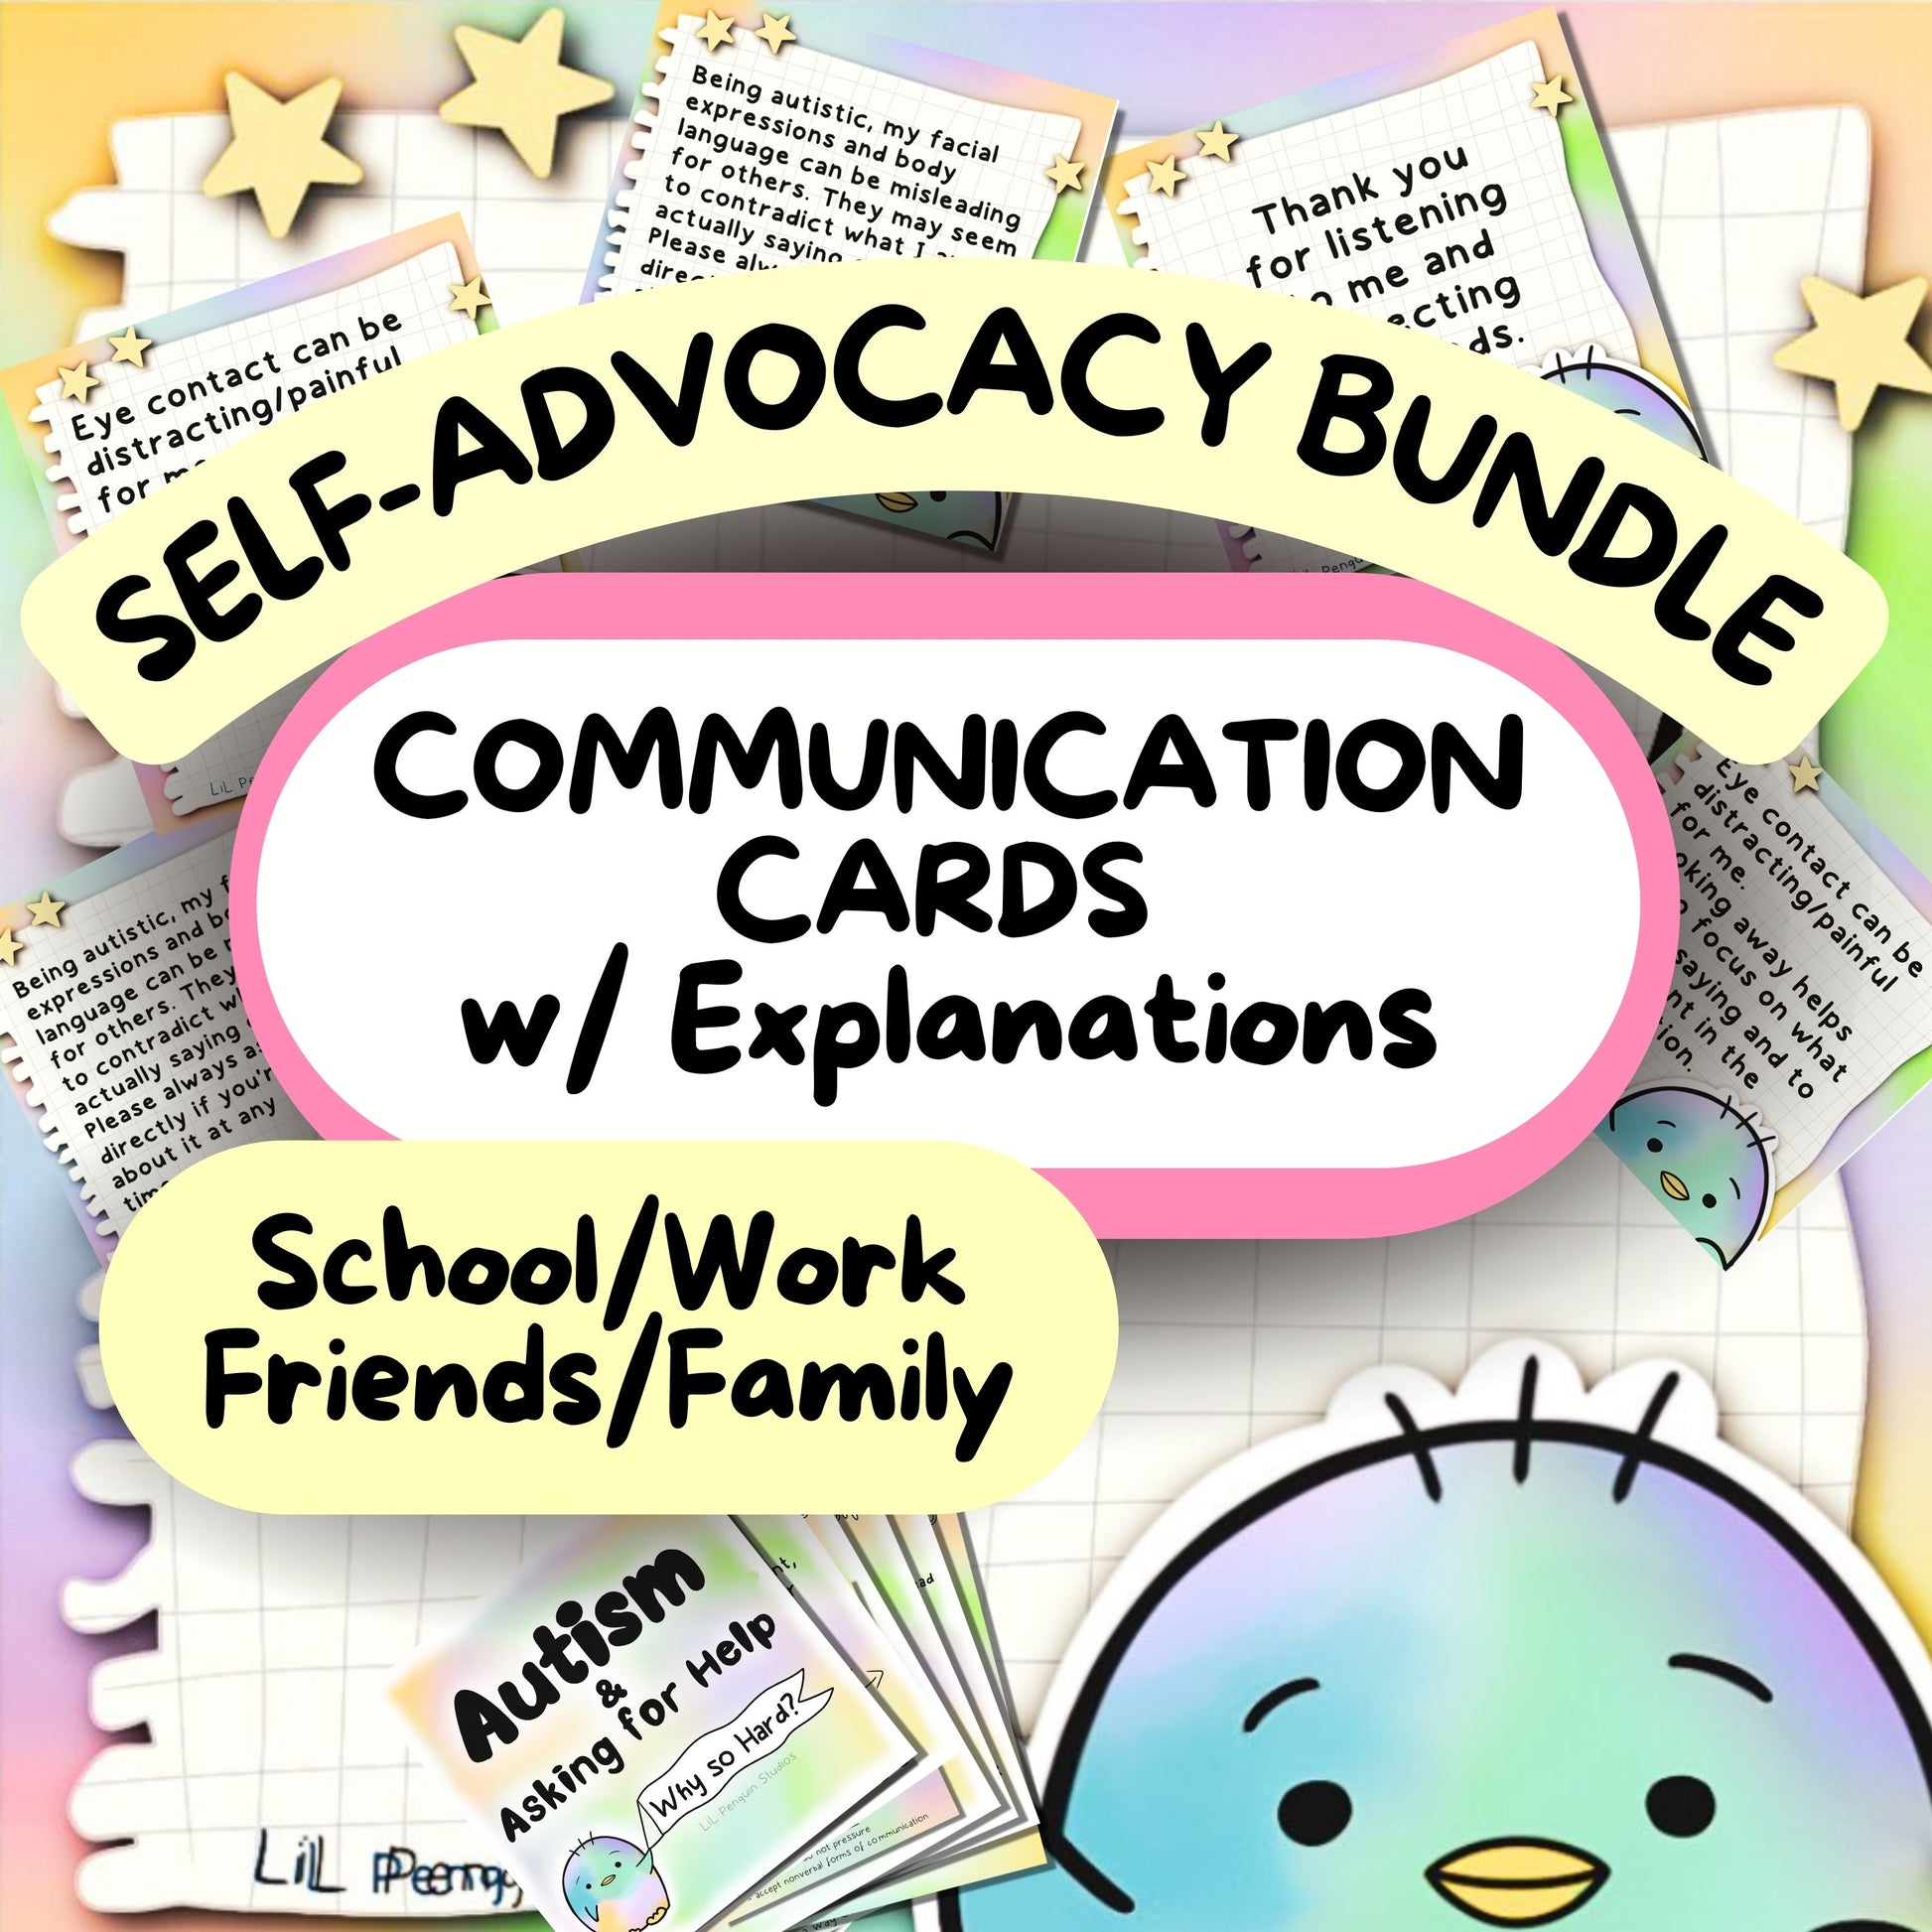 Communication Cards with Explanations - Autism Self-Advocacy Card Pack (School, Work, Friends, Family) hand-drawn by an autistic artist (LiL Penguin Studios( 